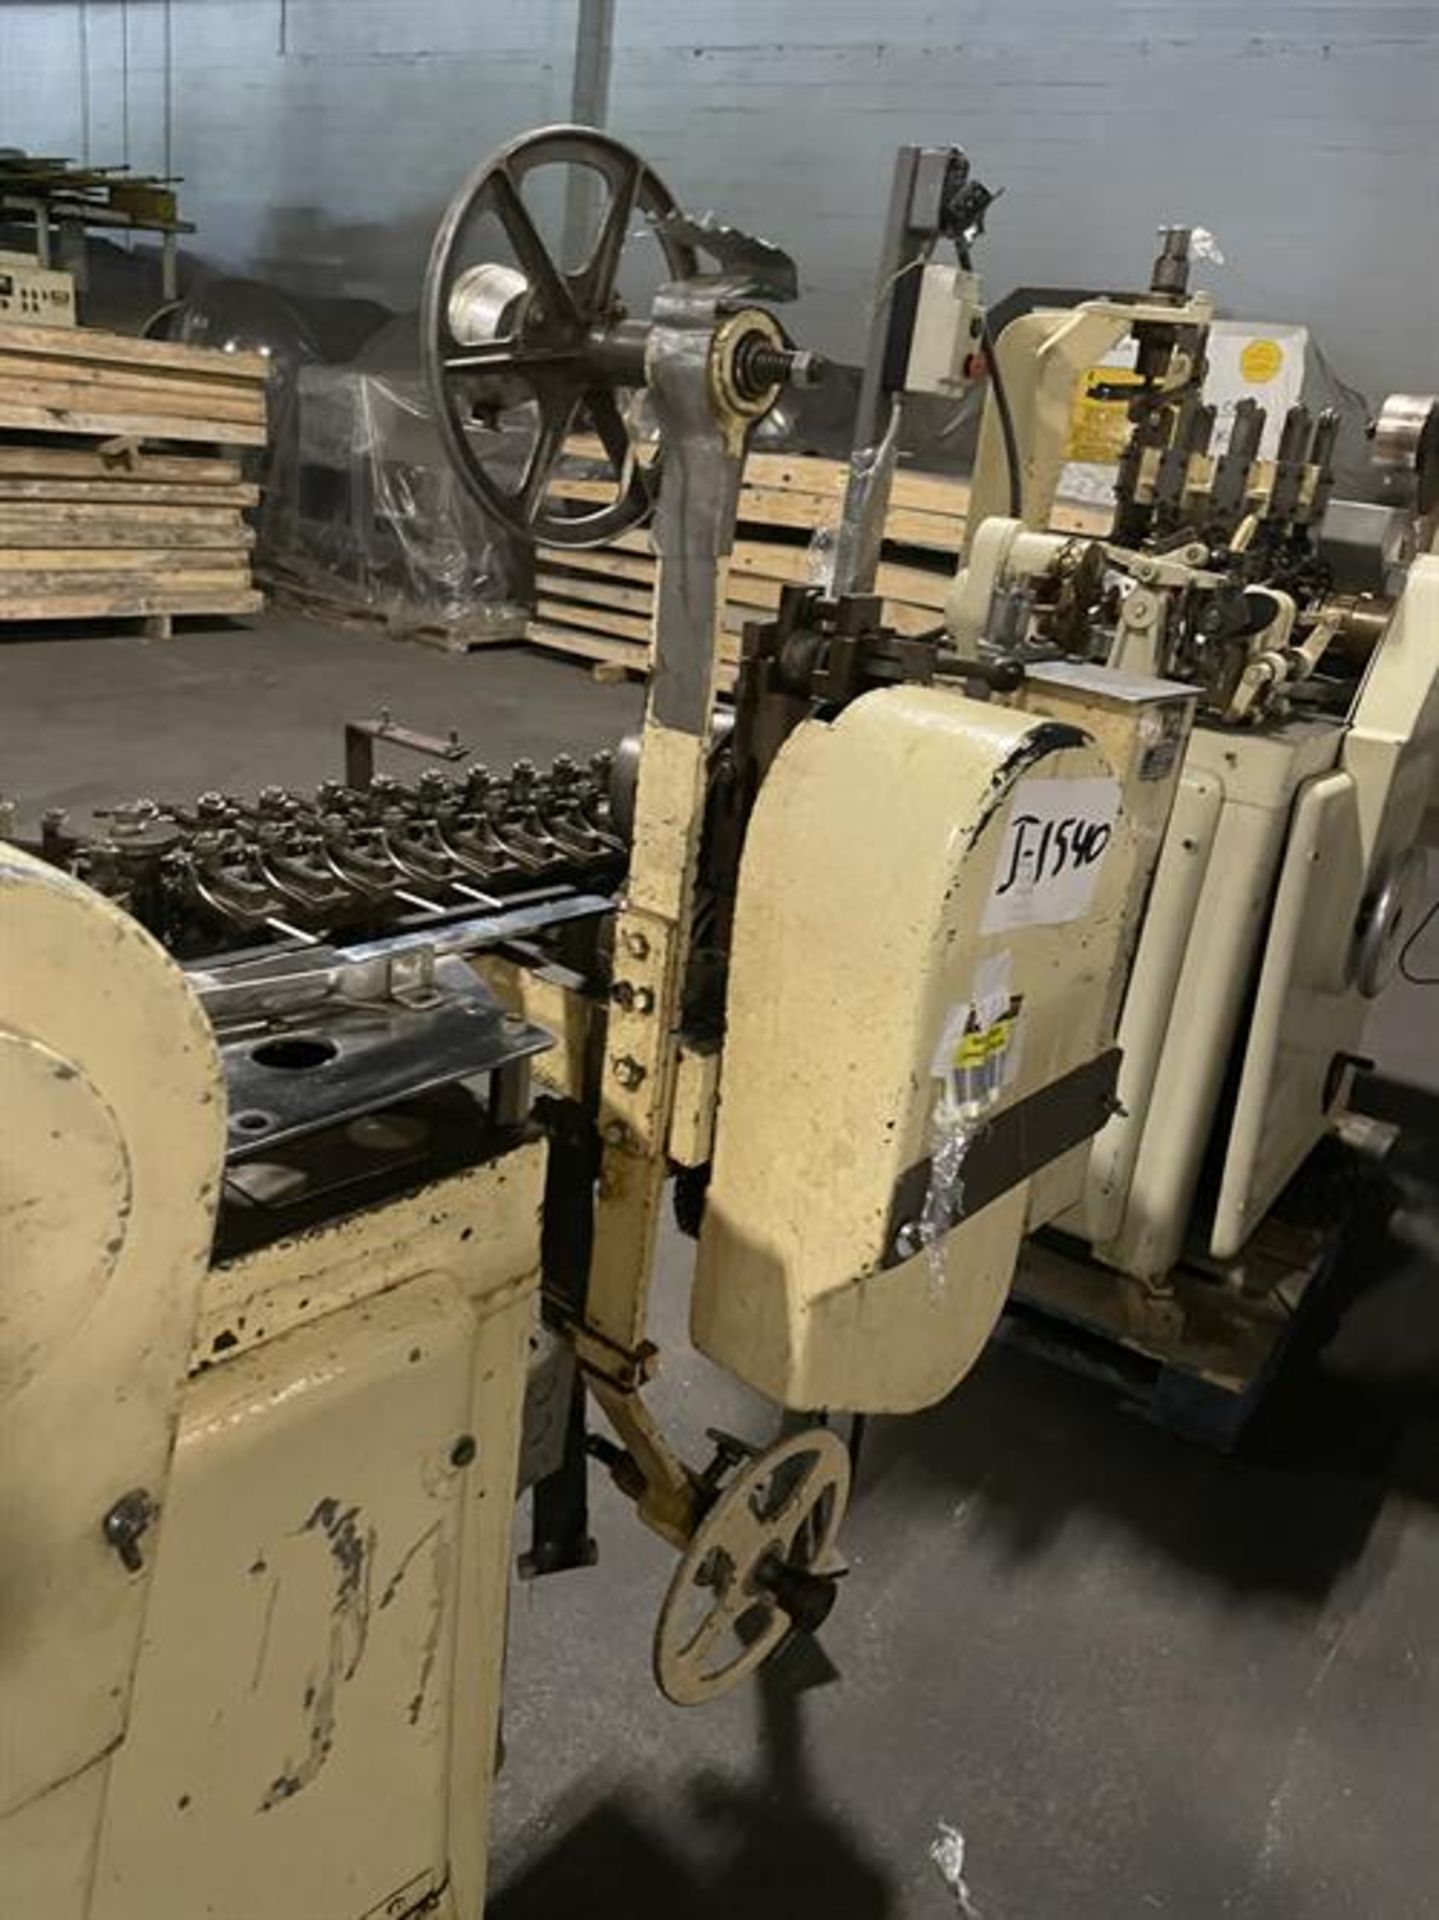 Latini model C Lollipop Former with 4-side Seal Wrapper - Candy knife - 11-station rotary press - Image 11 of 14